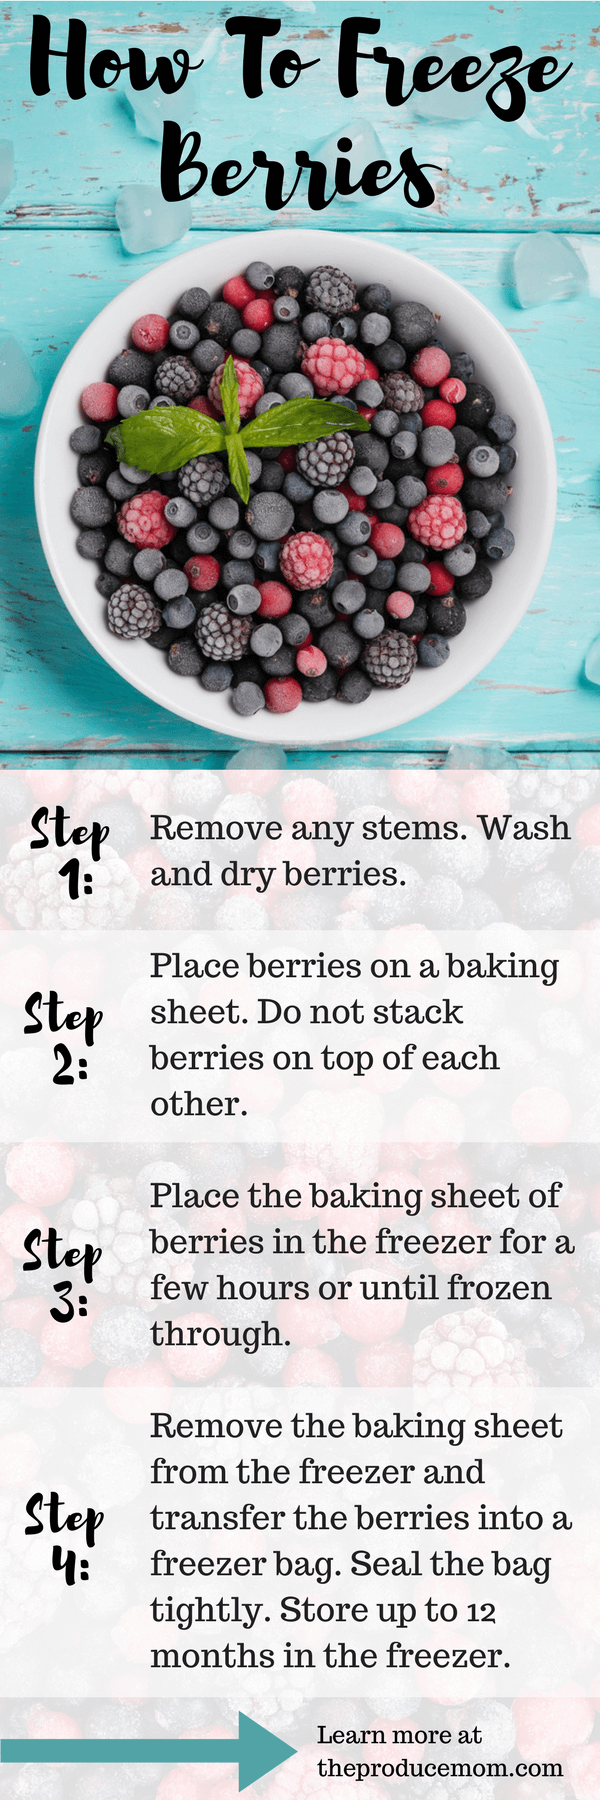 How To Freeze Berries final 1